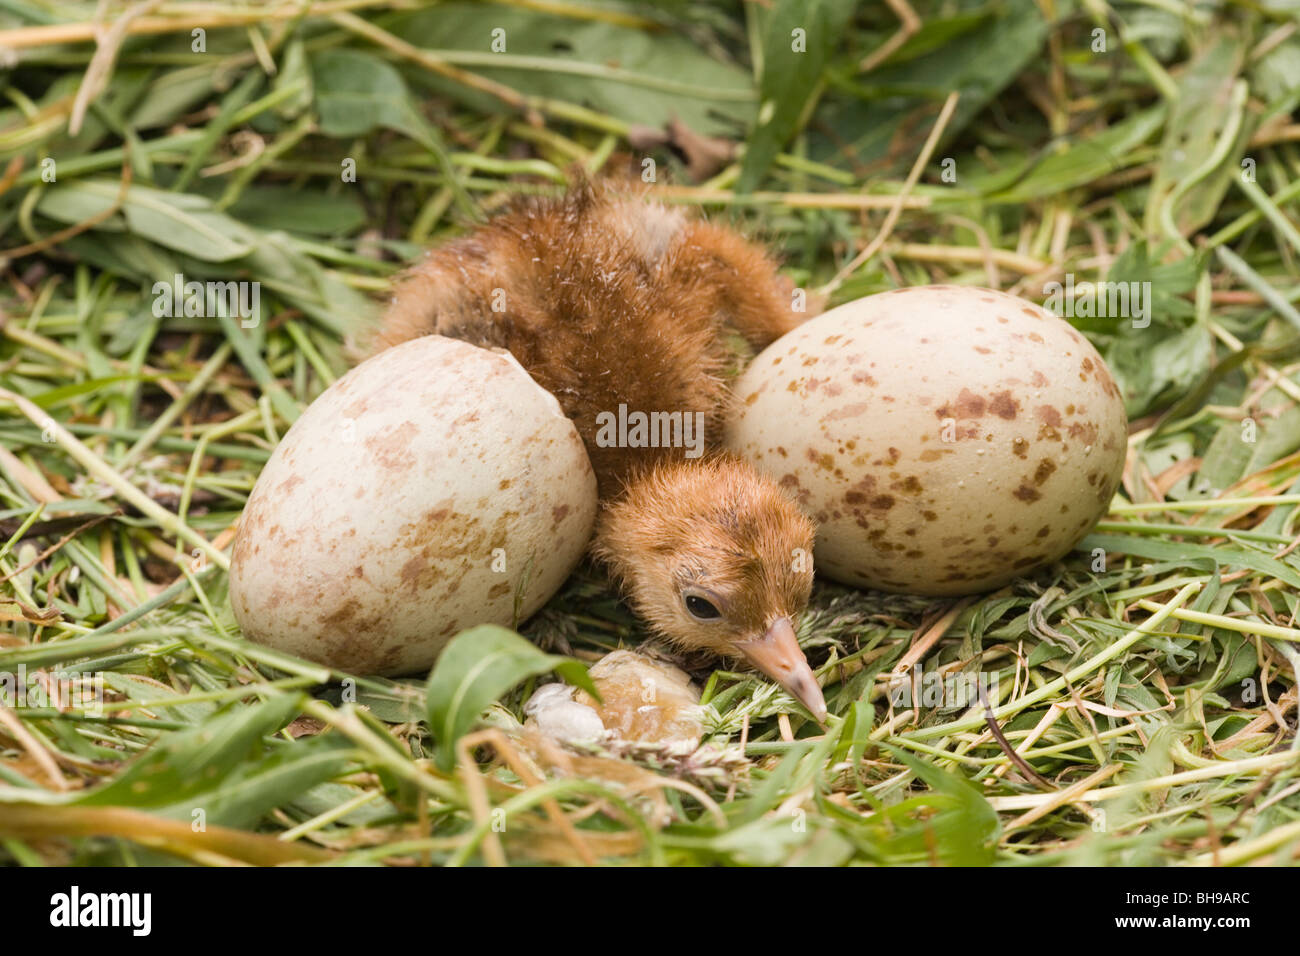 Common, European or Eurasian Crane (Grus grus). Just emerged chick and shell on left, with second egg on right still to hatch. Stock Photo